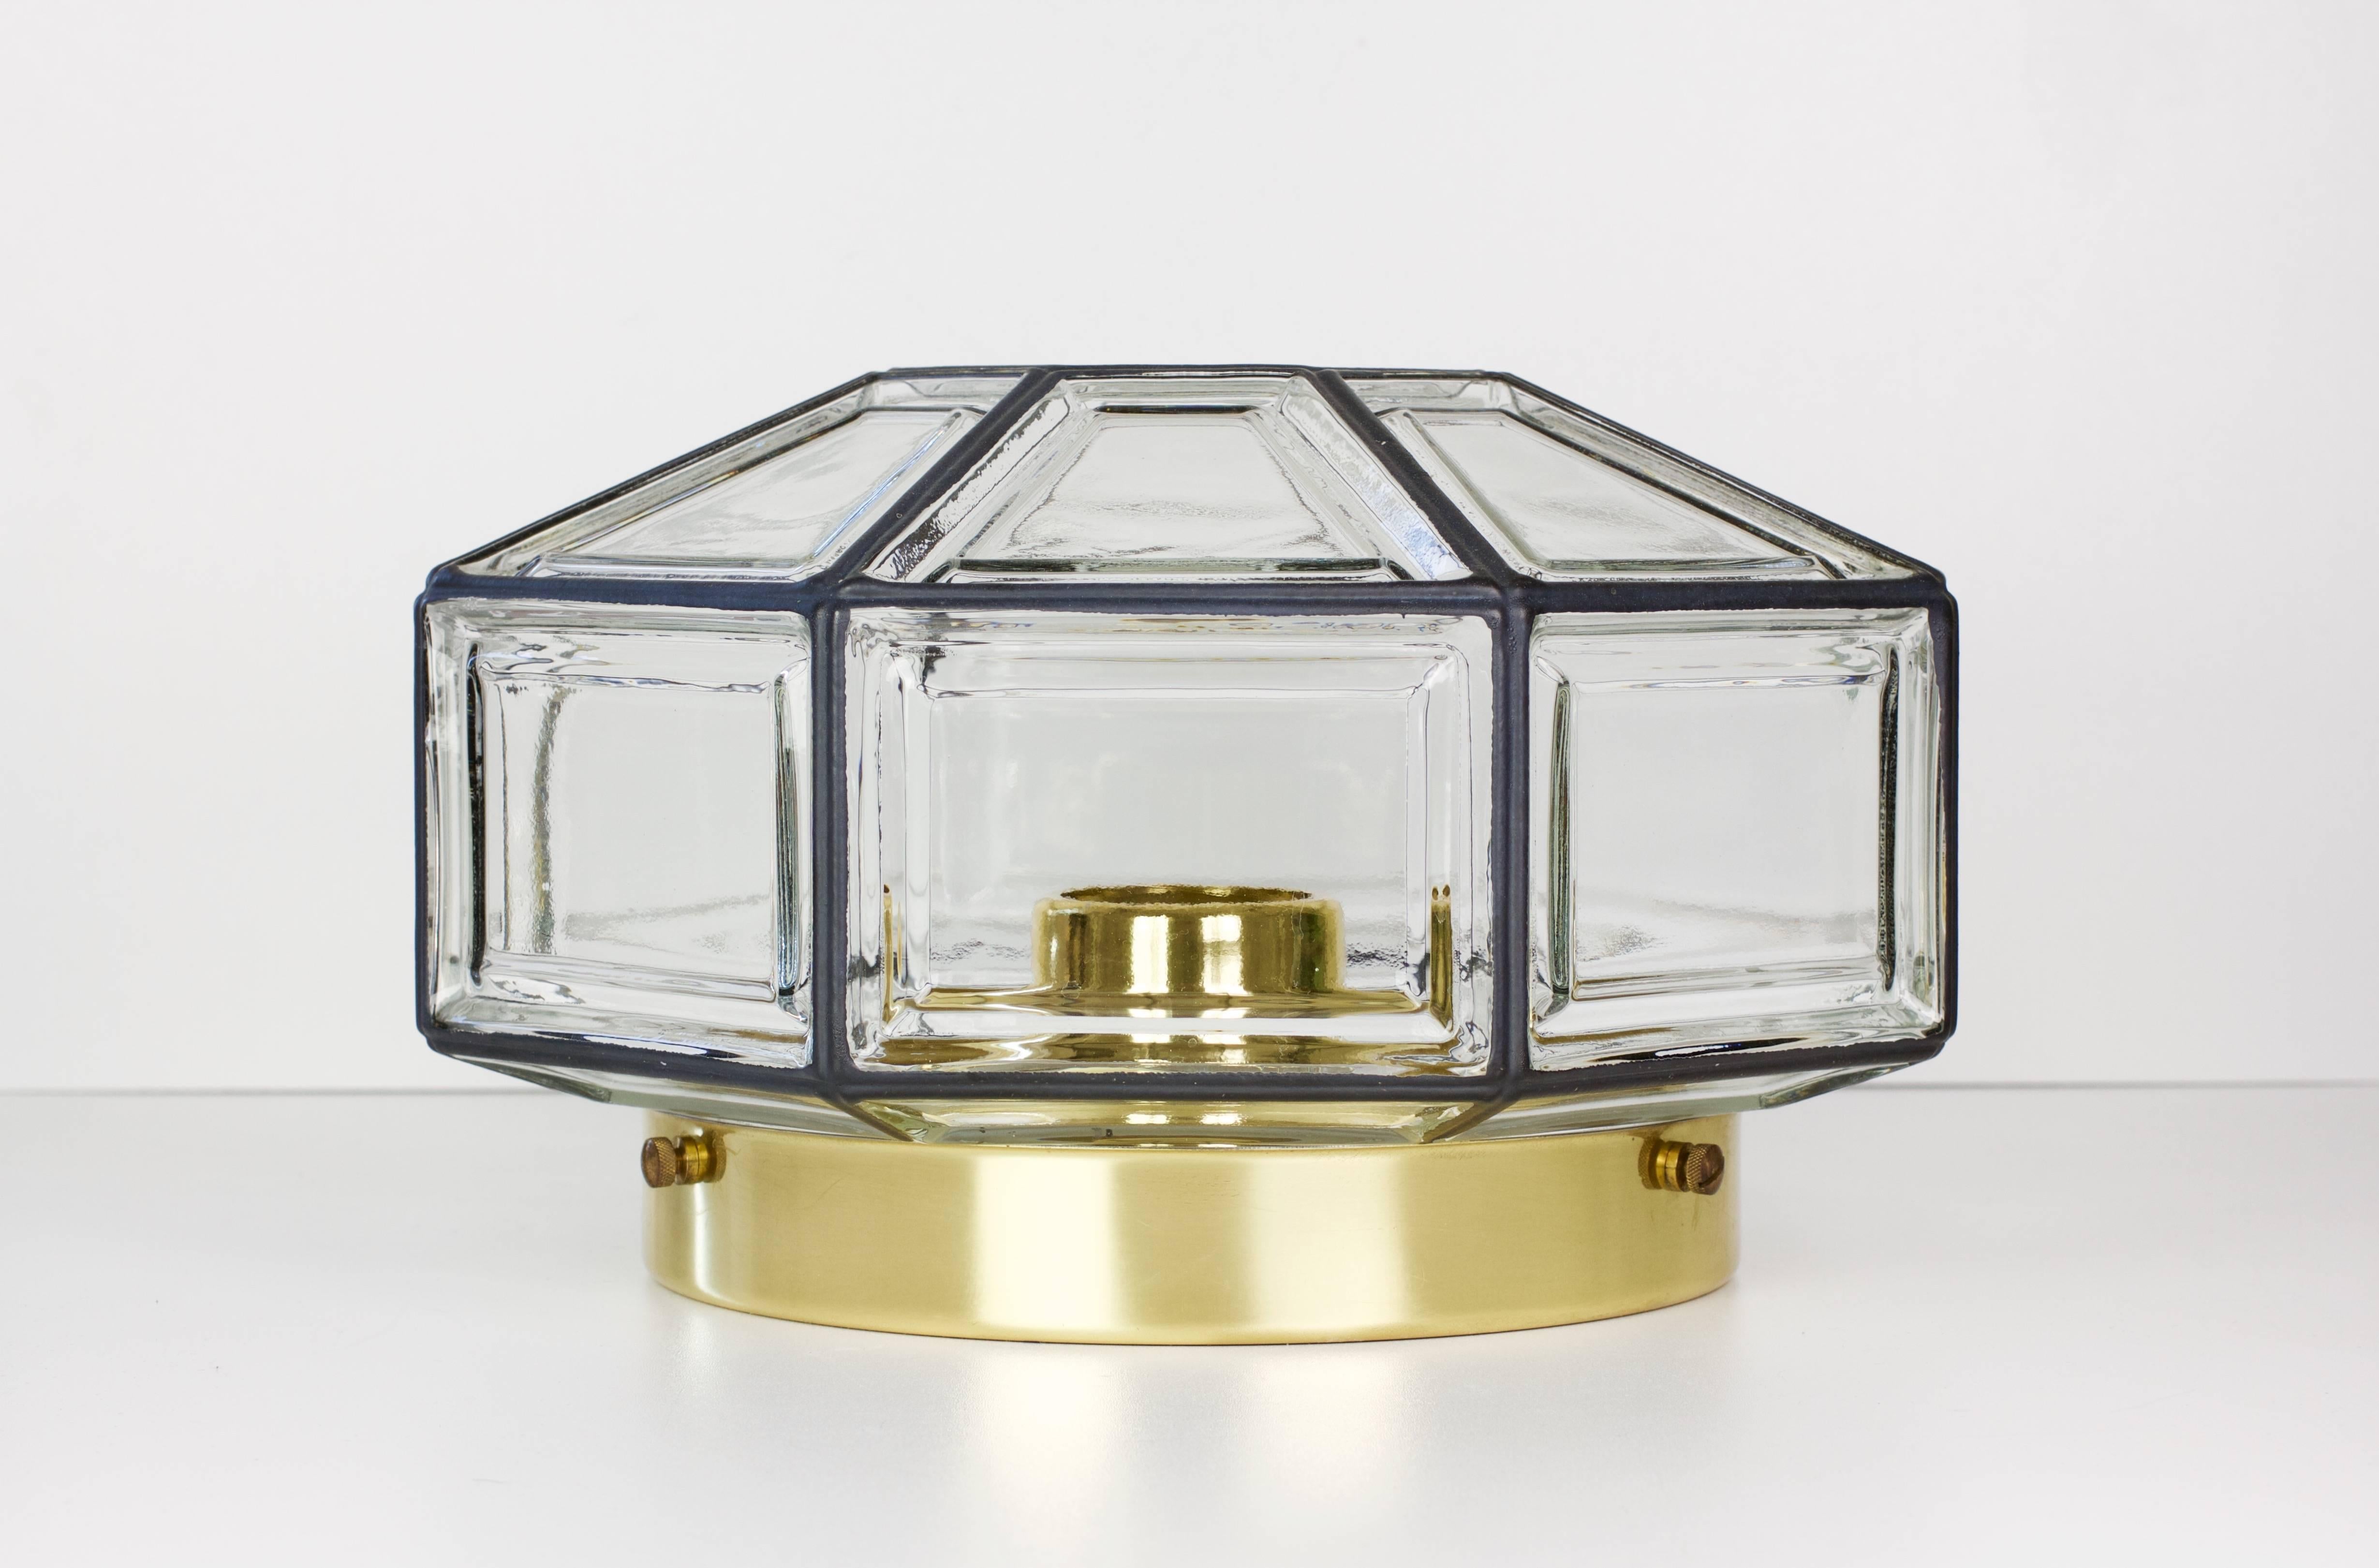 Octagonally shaped, minimalist German made flush mount light fixture produced by Glashütte Limburg circa 1965. This Art Deco and lantern style Plafonnier casts a fantastic light when mounted on the ceiling or wall and used with a gold crowned